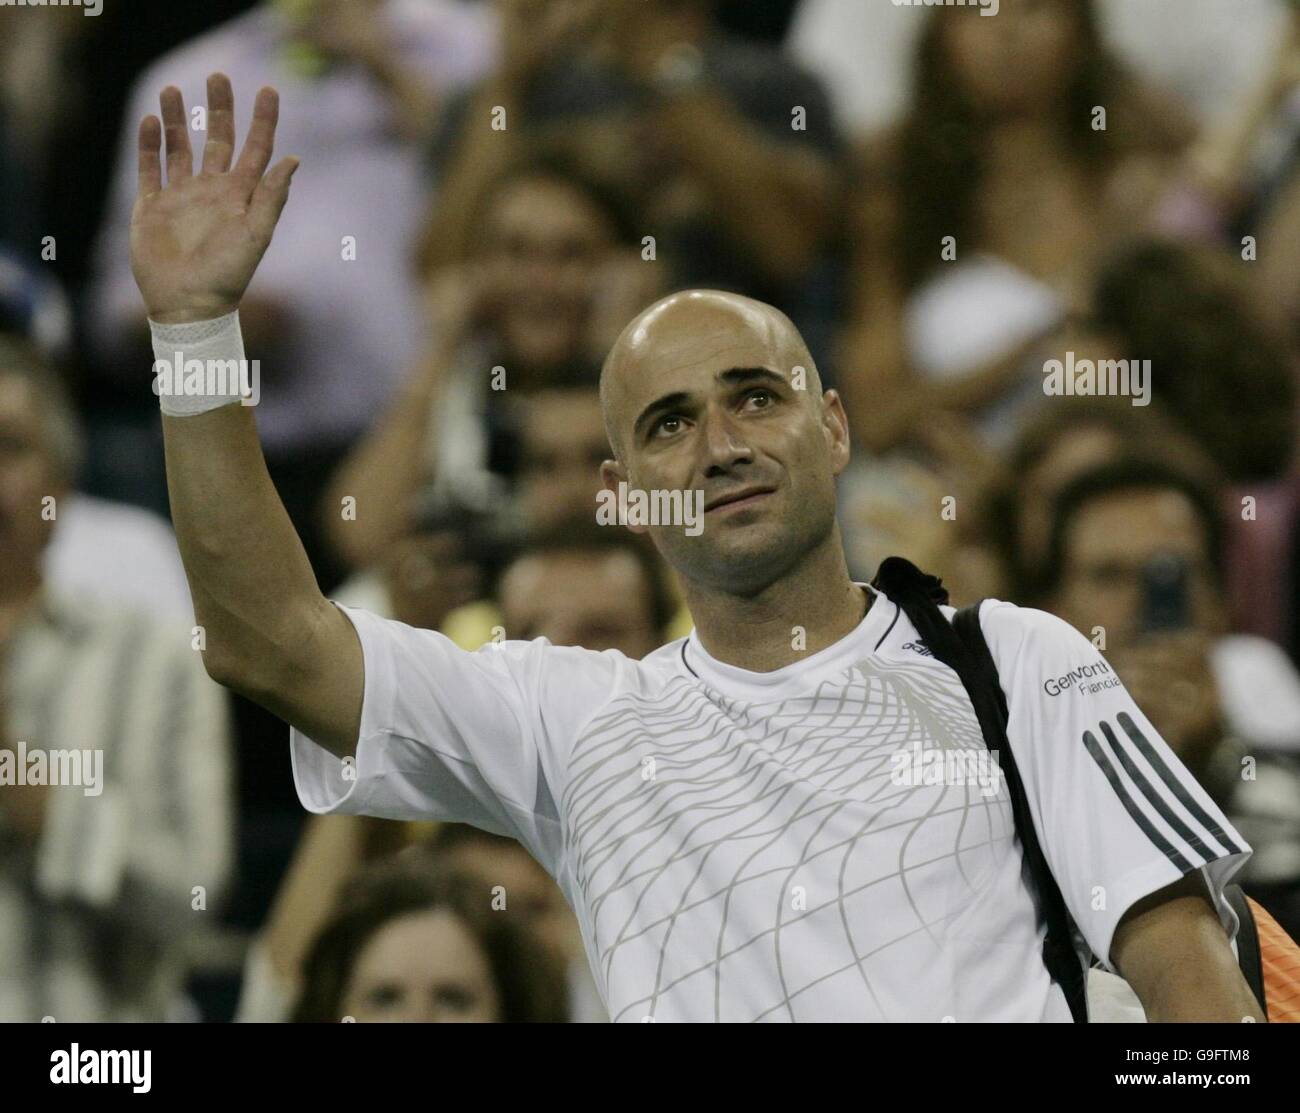 An emotional Andre Agassi waves to the crowd before his first round match against Andrei Pavel during the US Open at Flushing Meadow, New York. After the tournament he is to retire from tennis. Stock Photo